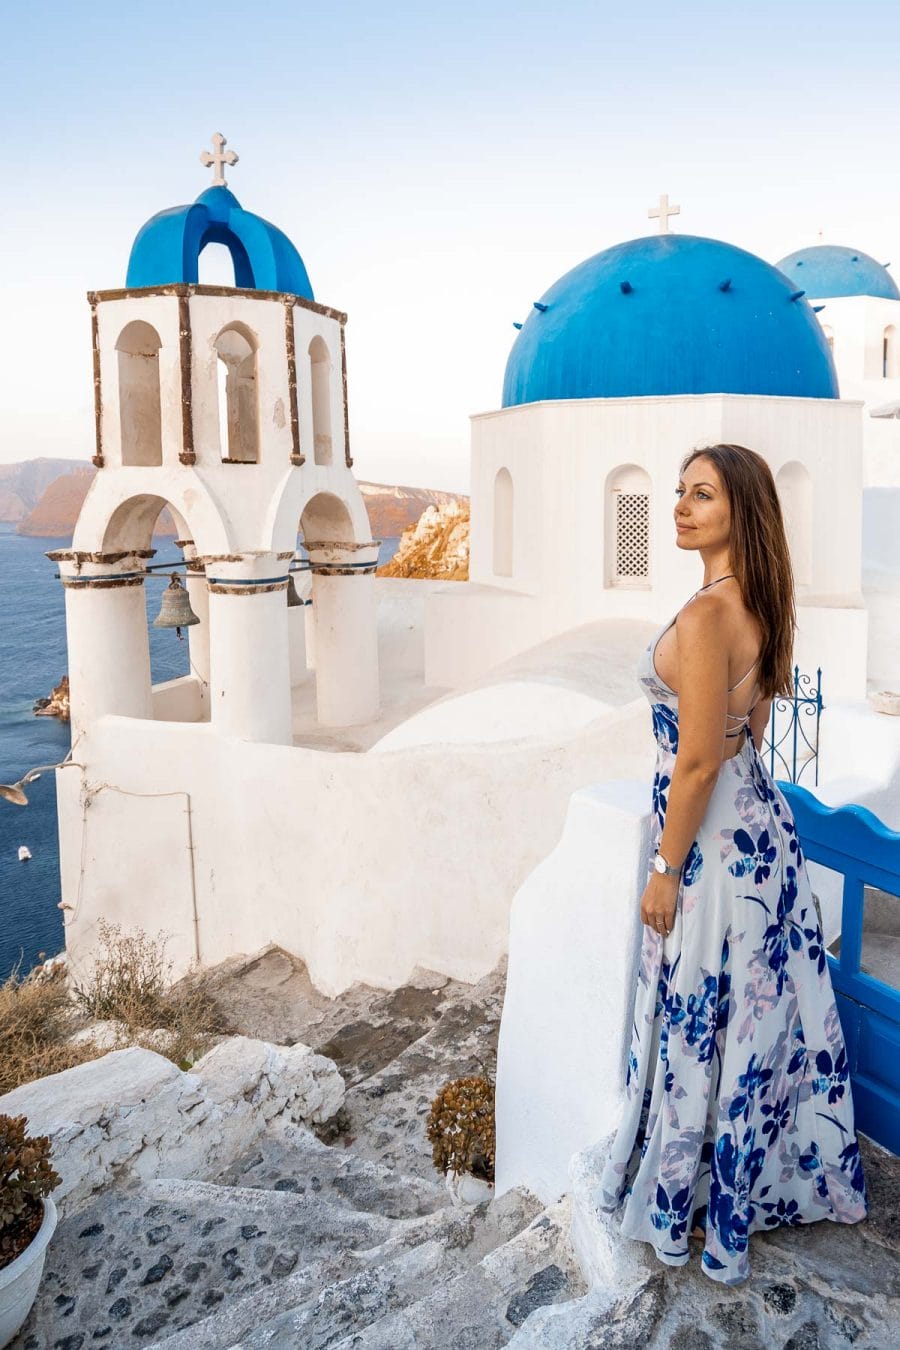 Girl in a blue dress standing in front of the three domes in Oia, Santorini